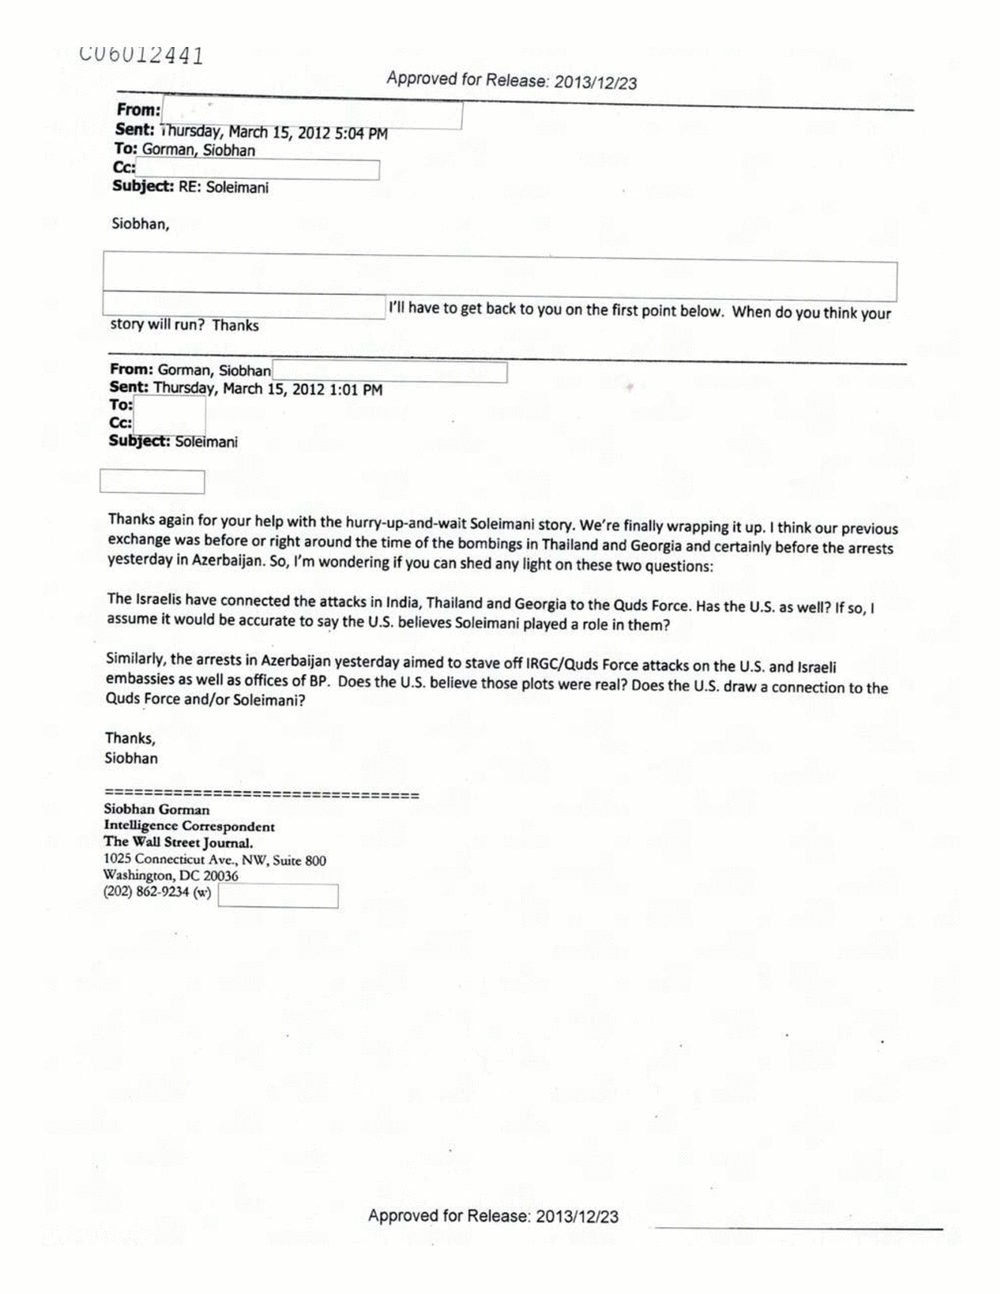 Page 26 from Email Correspondence Between Reporters and CIA Flacks